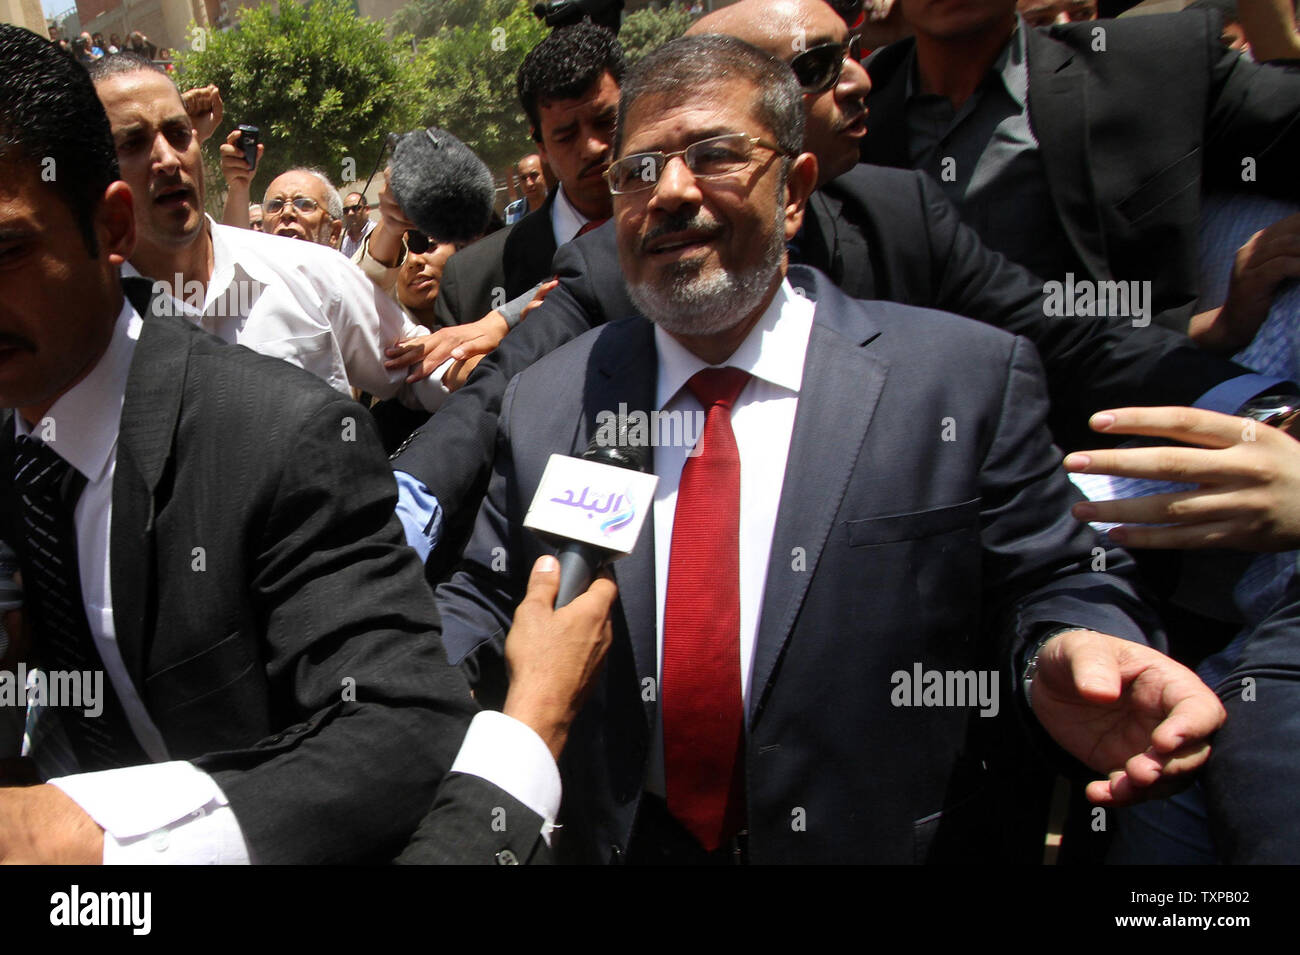 Presidential candidate Mohamed Morsy(C) of the Muslim Brotherhood arrives to cast his vote at a polling station in a school in Al-Sharqya, 60 km (37 miles) northeast of Cairo in Egypt, June 16, 2012. Egypt's first free presidential election concludes this weekend in a run-off between the Muslim Brotherhood's candidate Mohamed Morsy and Ahmed Shafik, the last prime minister of ousted leader Hosni Mubarak. UPI/Ahmed Jomaa Stock Photo